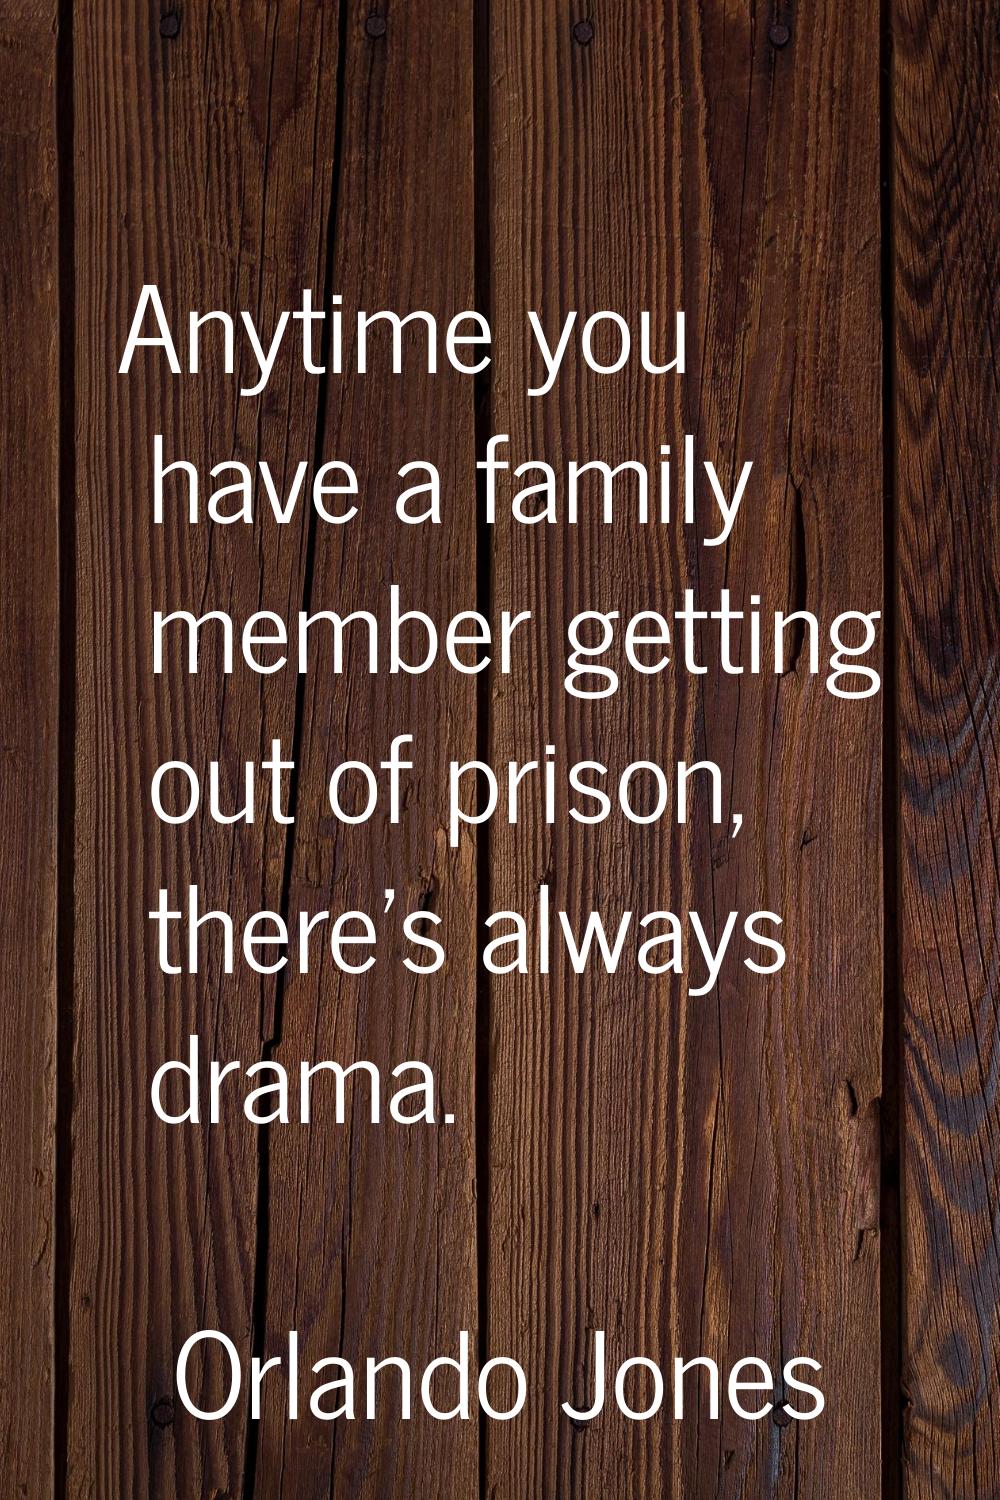 Anytime you have a family member getting out of prison, there's always drama.